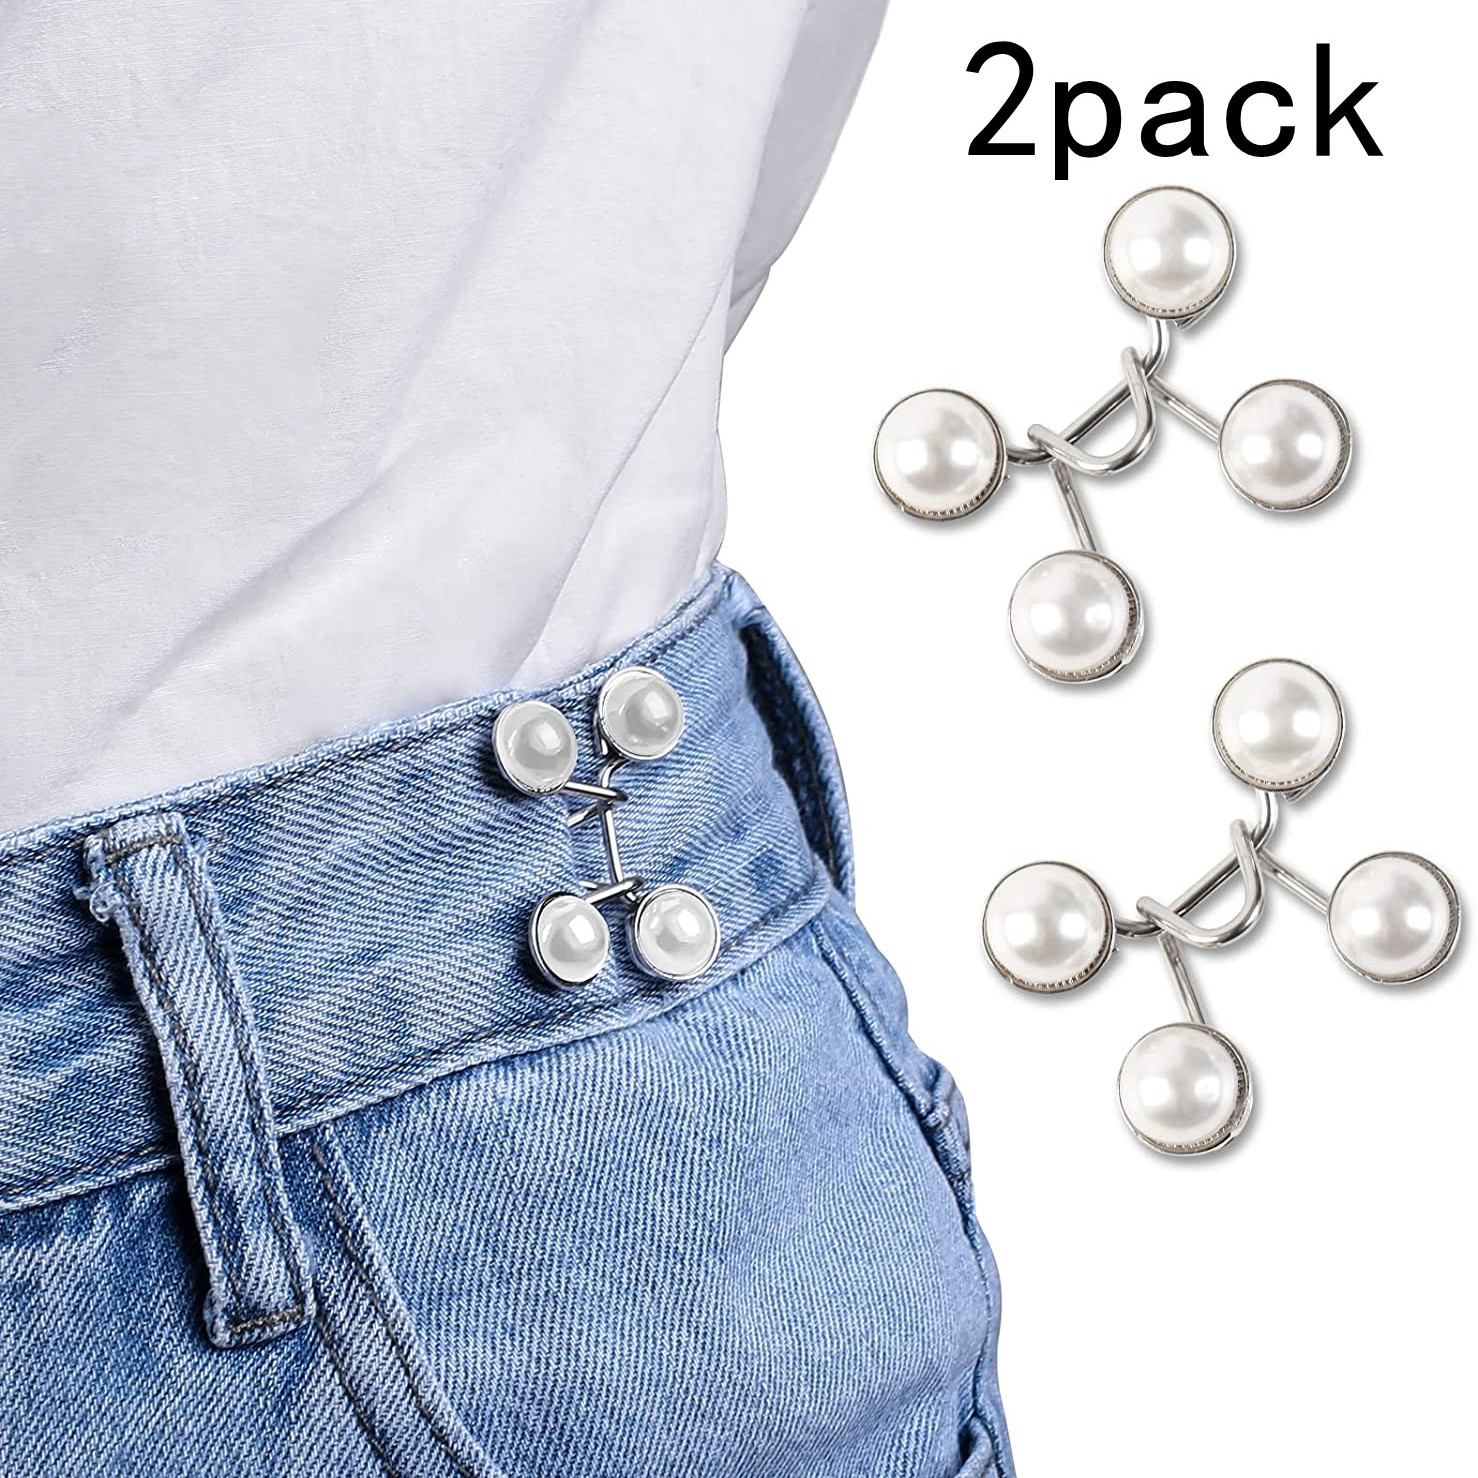 Pant Waist Tightener Adjustable Jean Button Pins 1PC Button Clip For Pants  No Sewing Required Easy To Install 